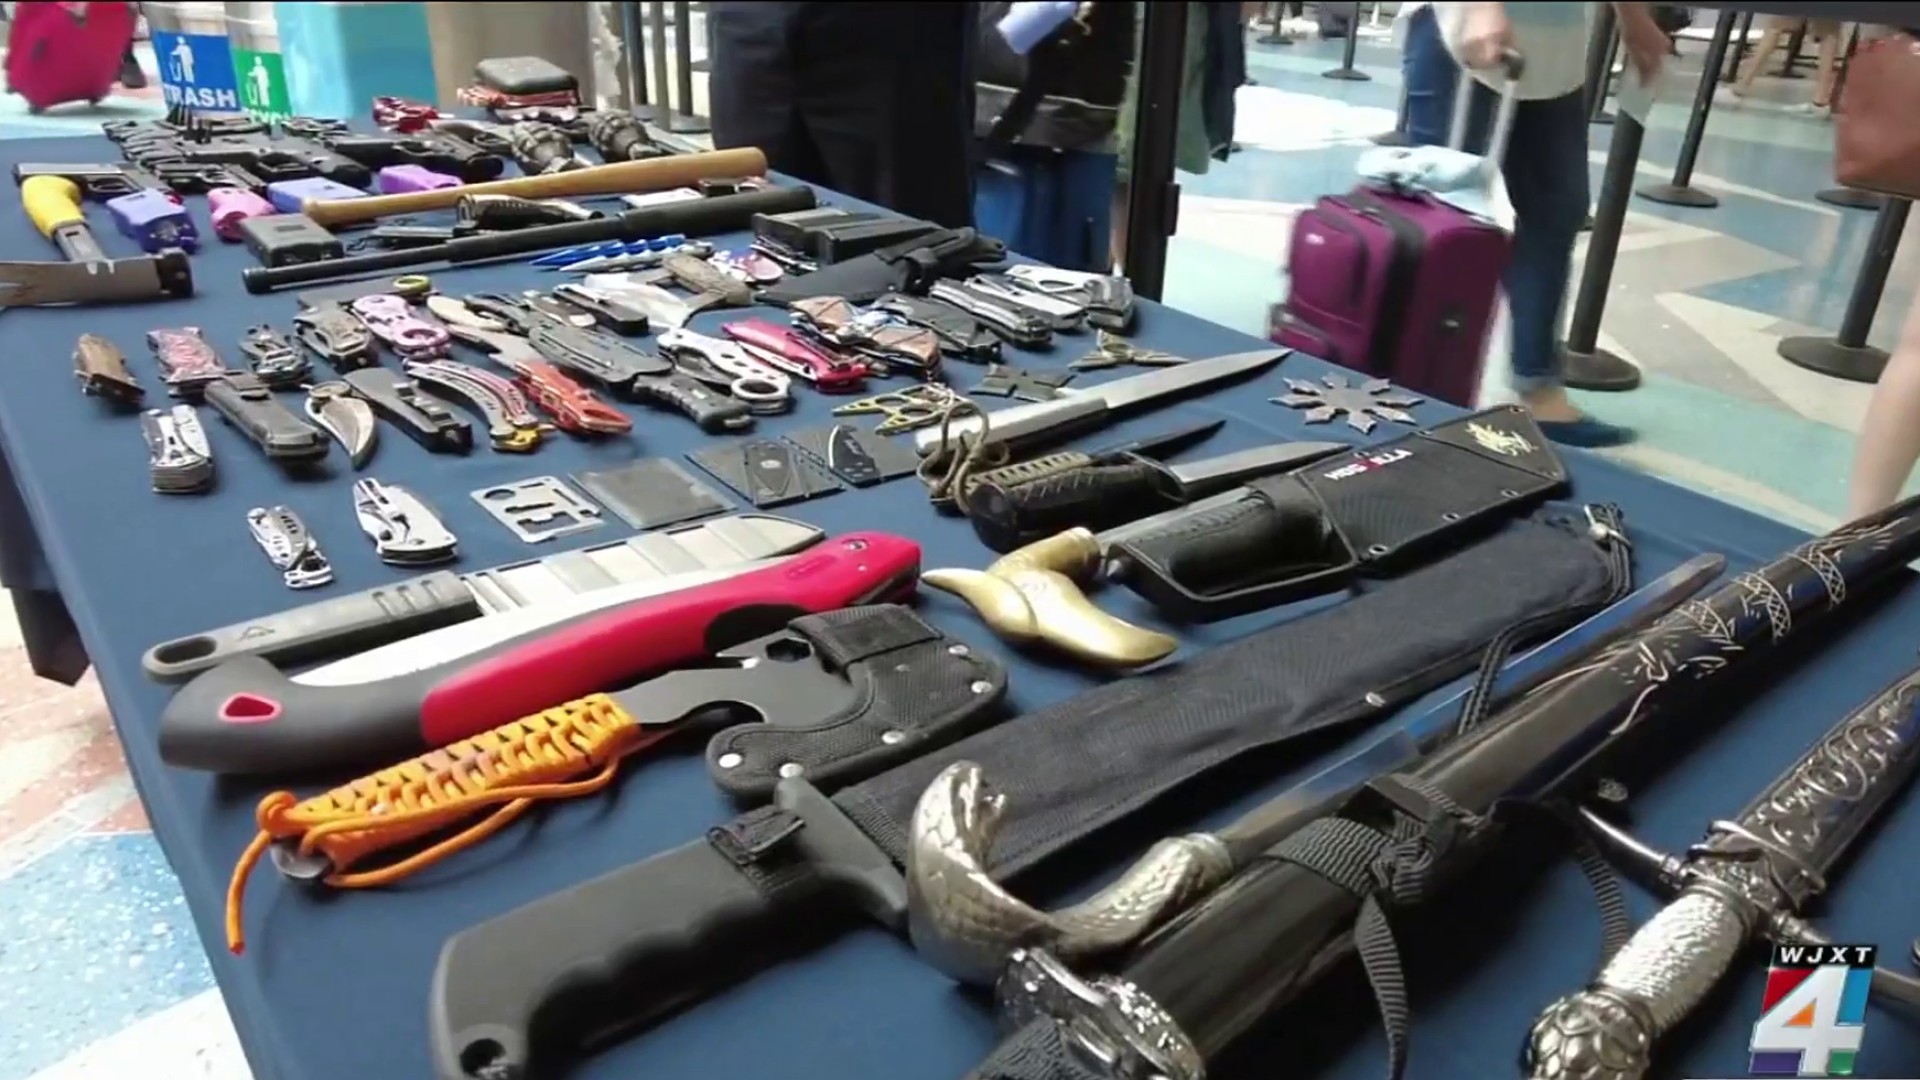 Knives, swords, Just a few of the items intercepted by ahead of Labor Day weekend